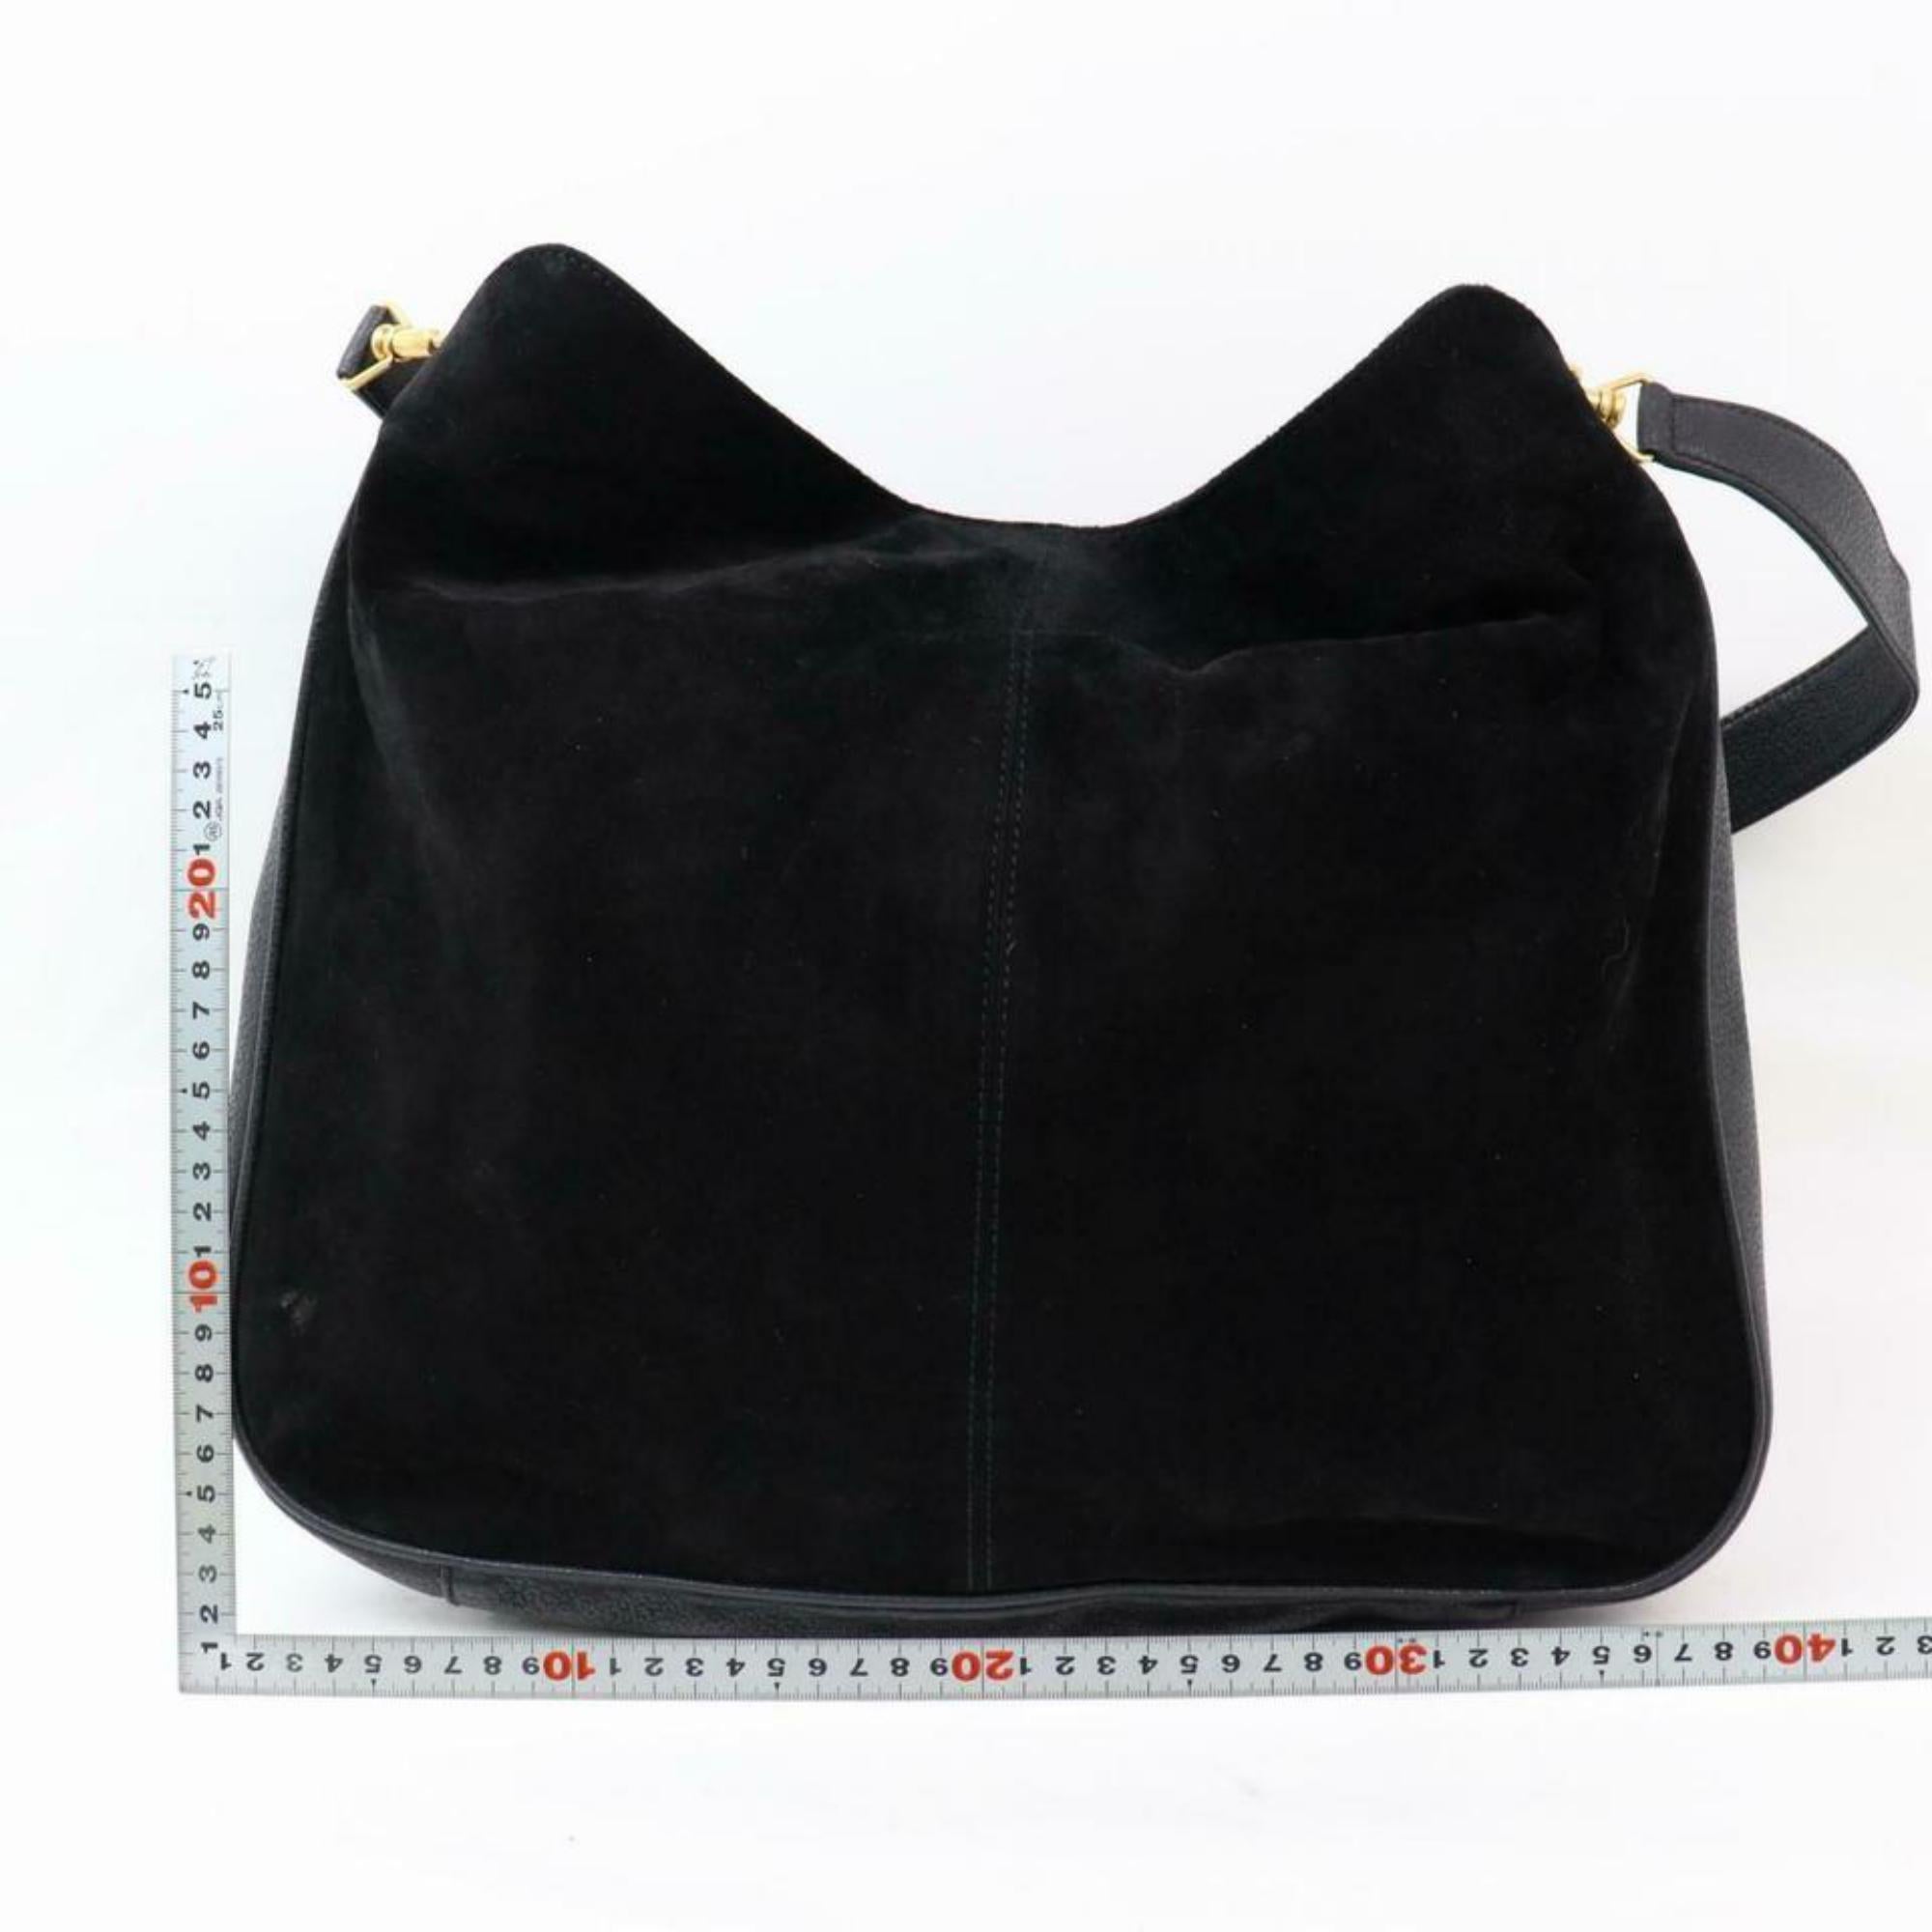 Gucci Bamboo 2way Hobo 870254 Black Suede Leather Shoulder Bag For Sale 2